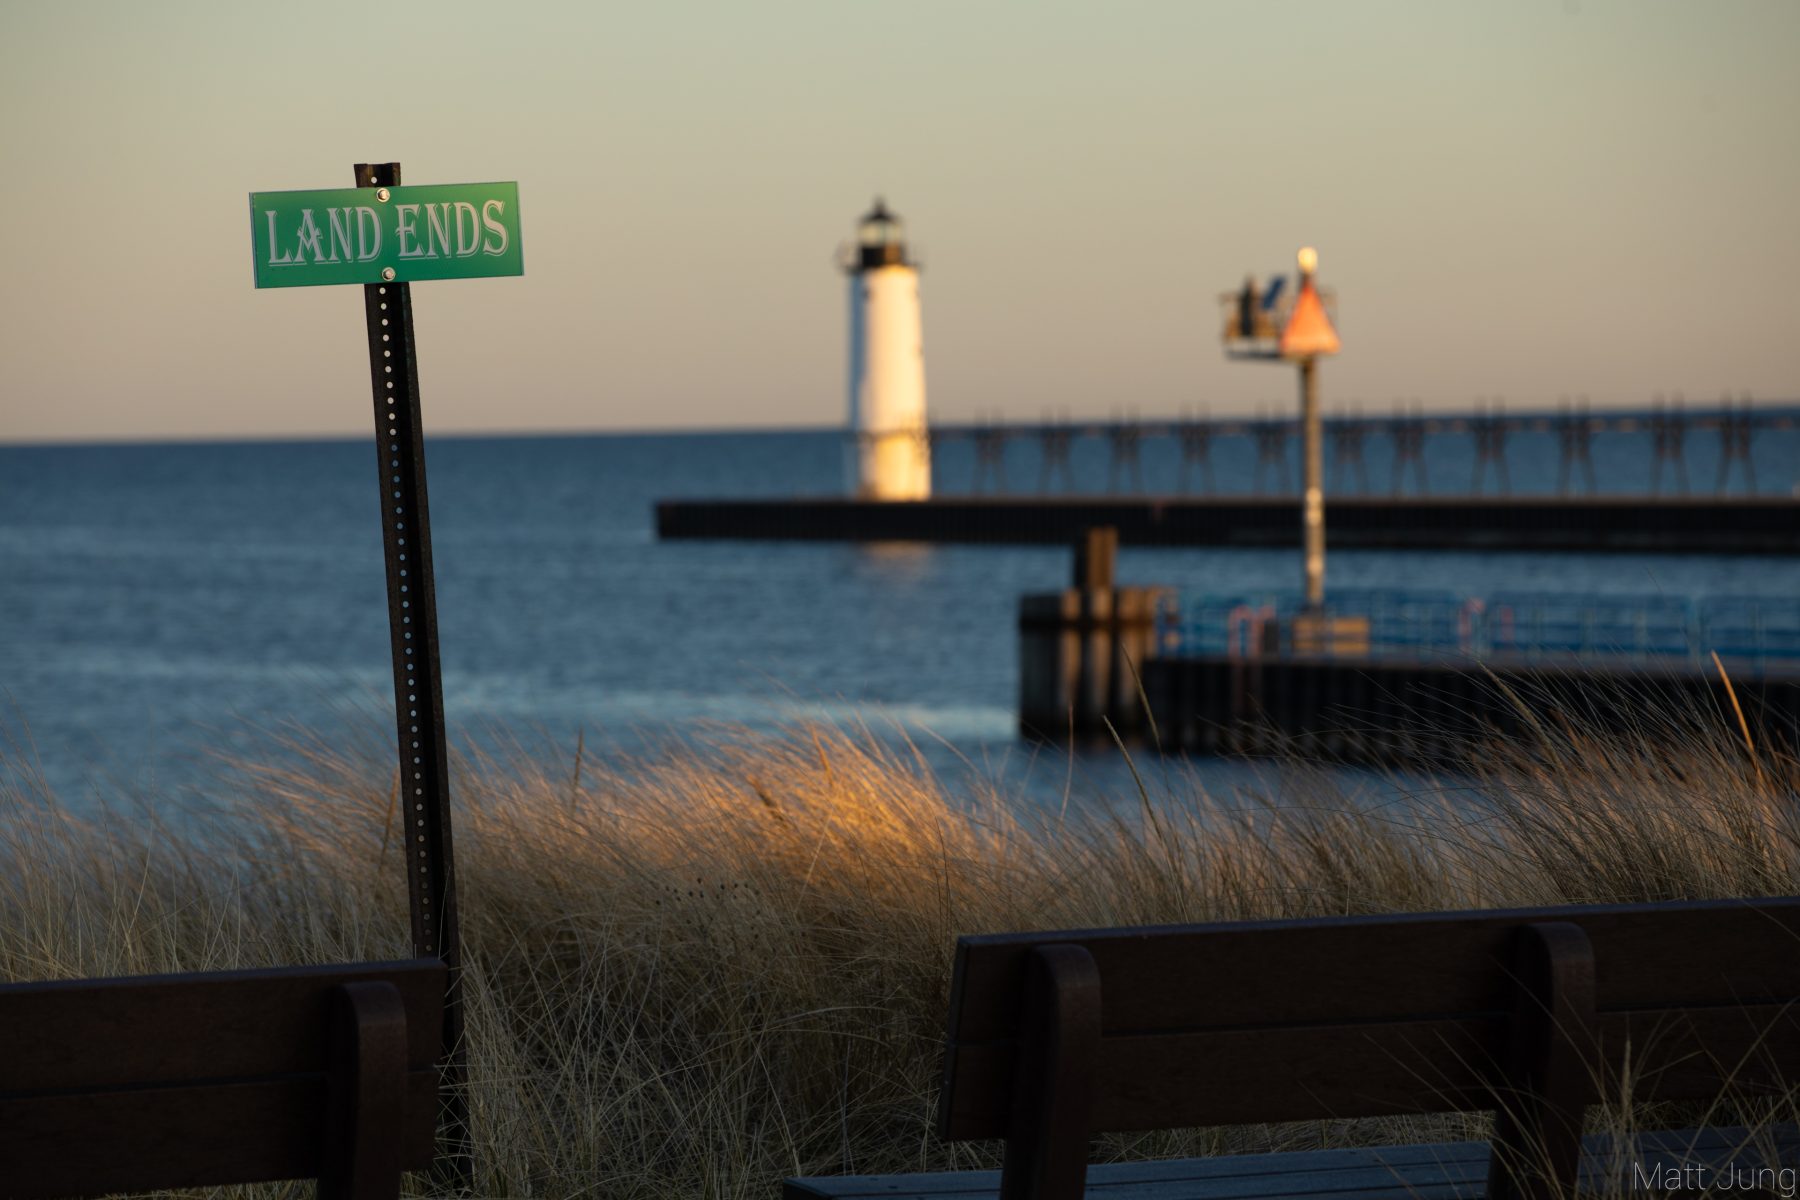 "Land Ends" sign in Manistee Michigan